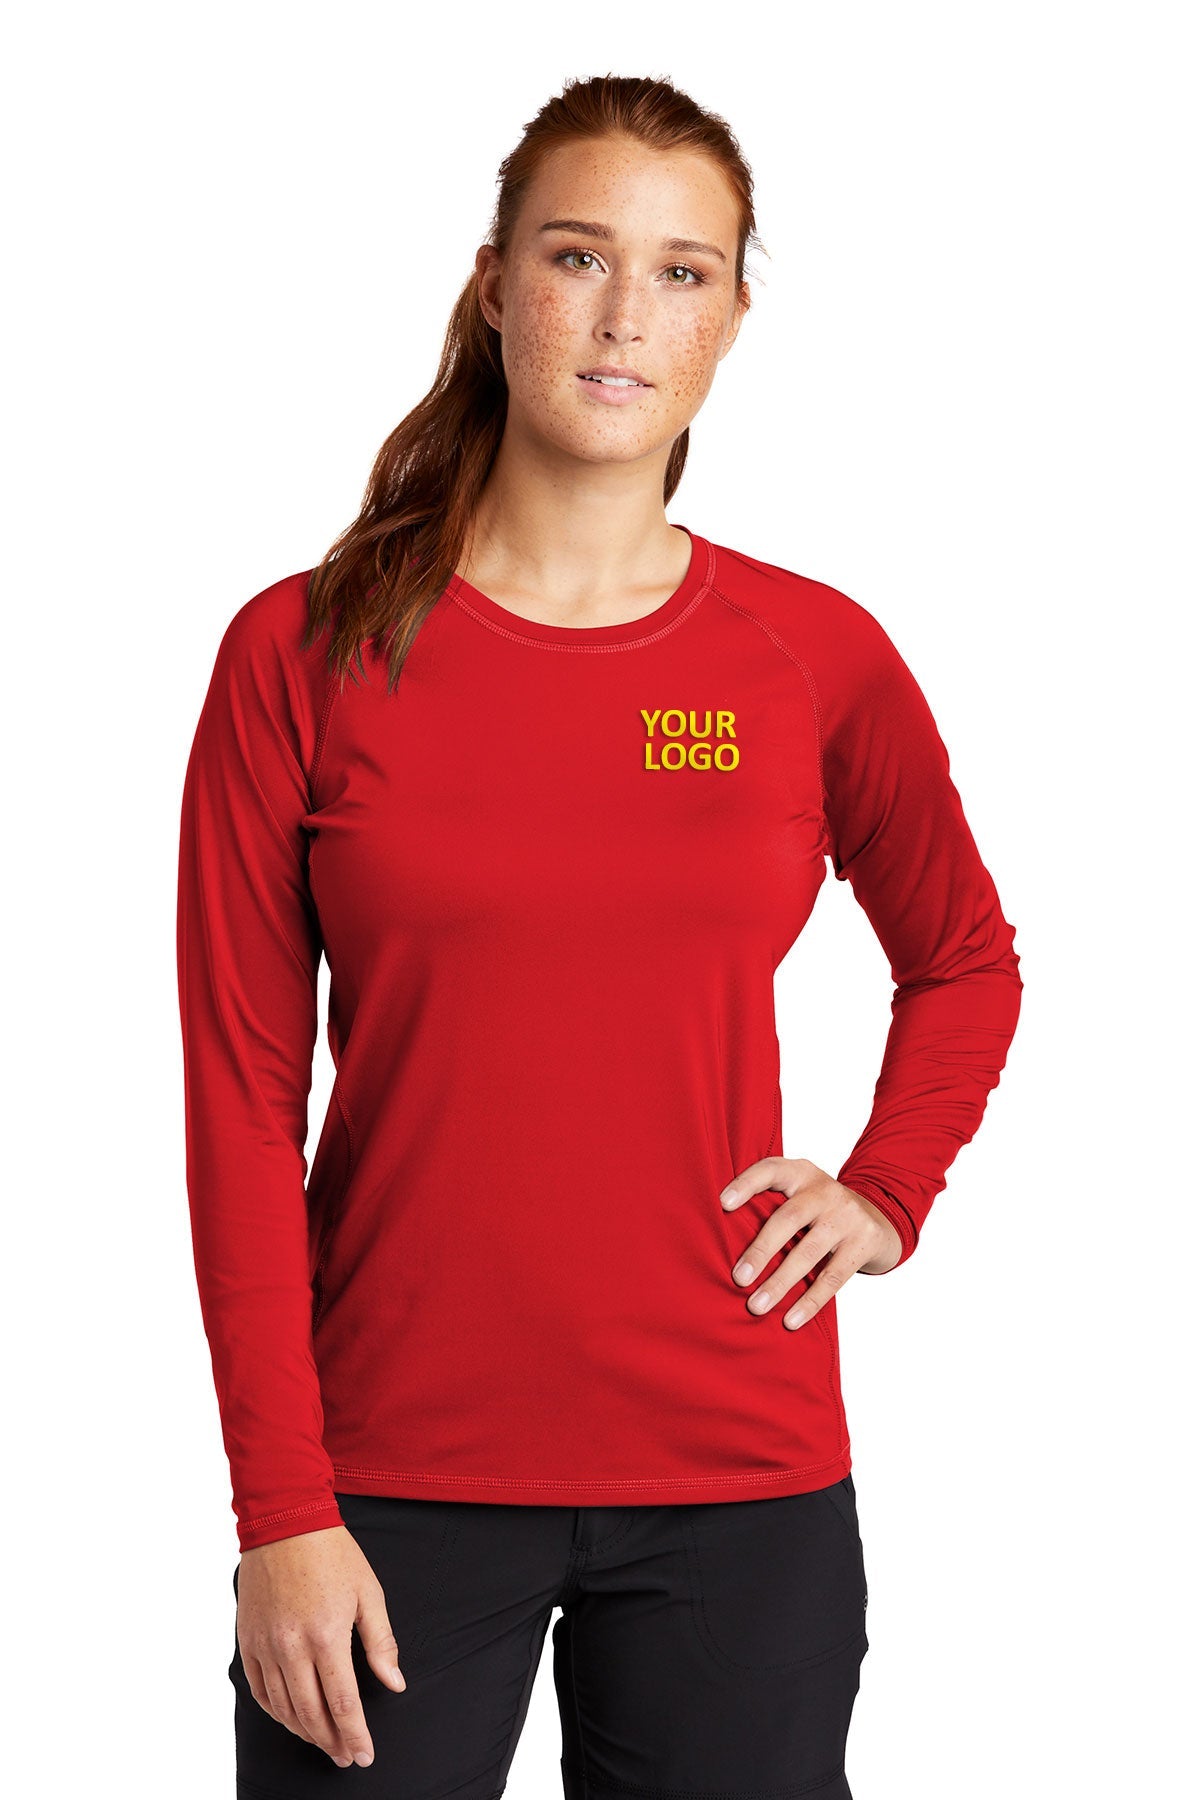 Sport-Tek True Red LST470LS custom embroidered polo shirts